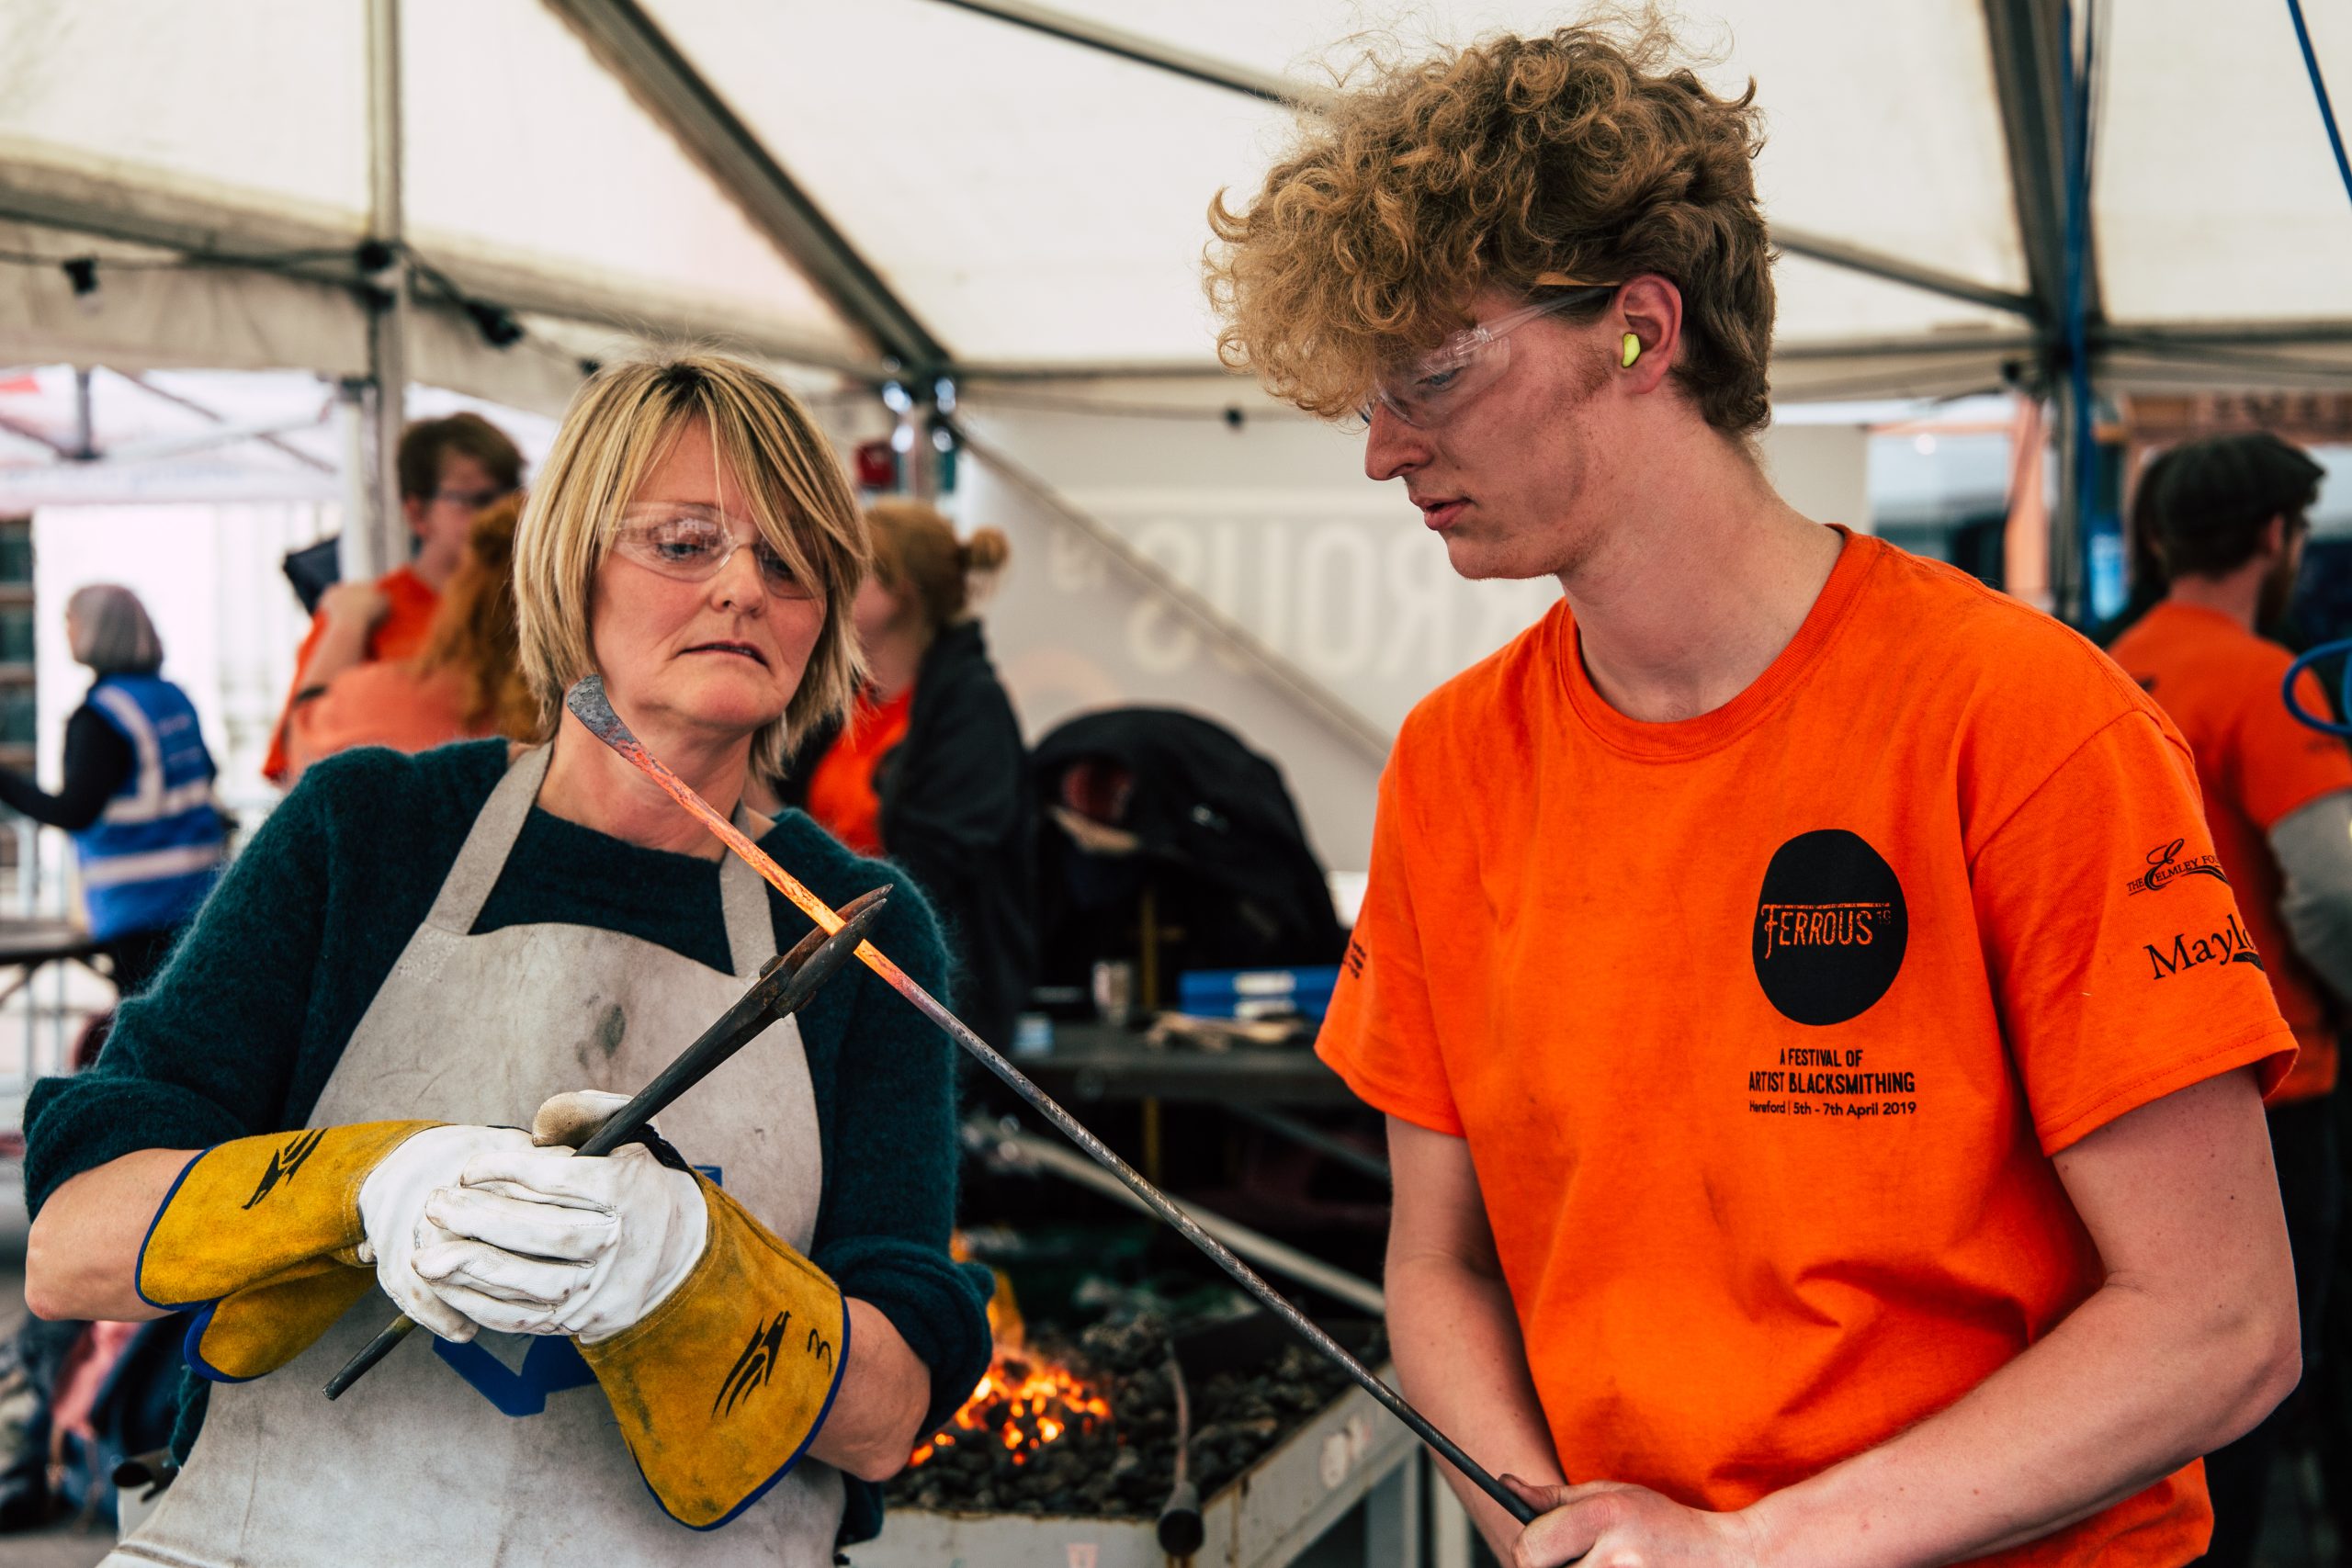 WHAT’S ON? | Hugely popular Blacksmithing Festival will bring an array of exciting events to Hereford from today